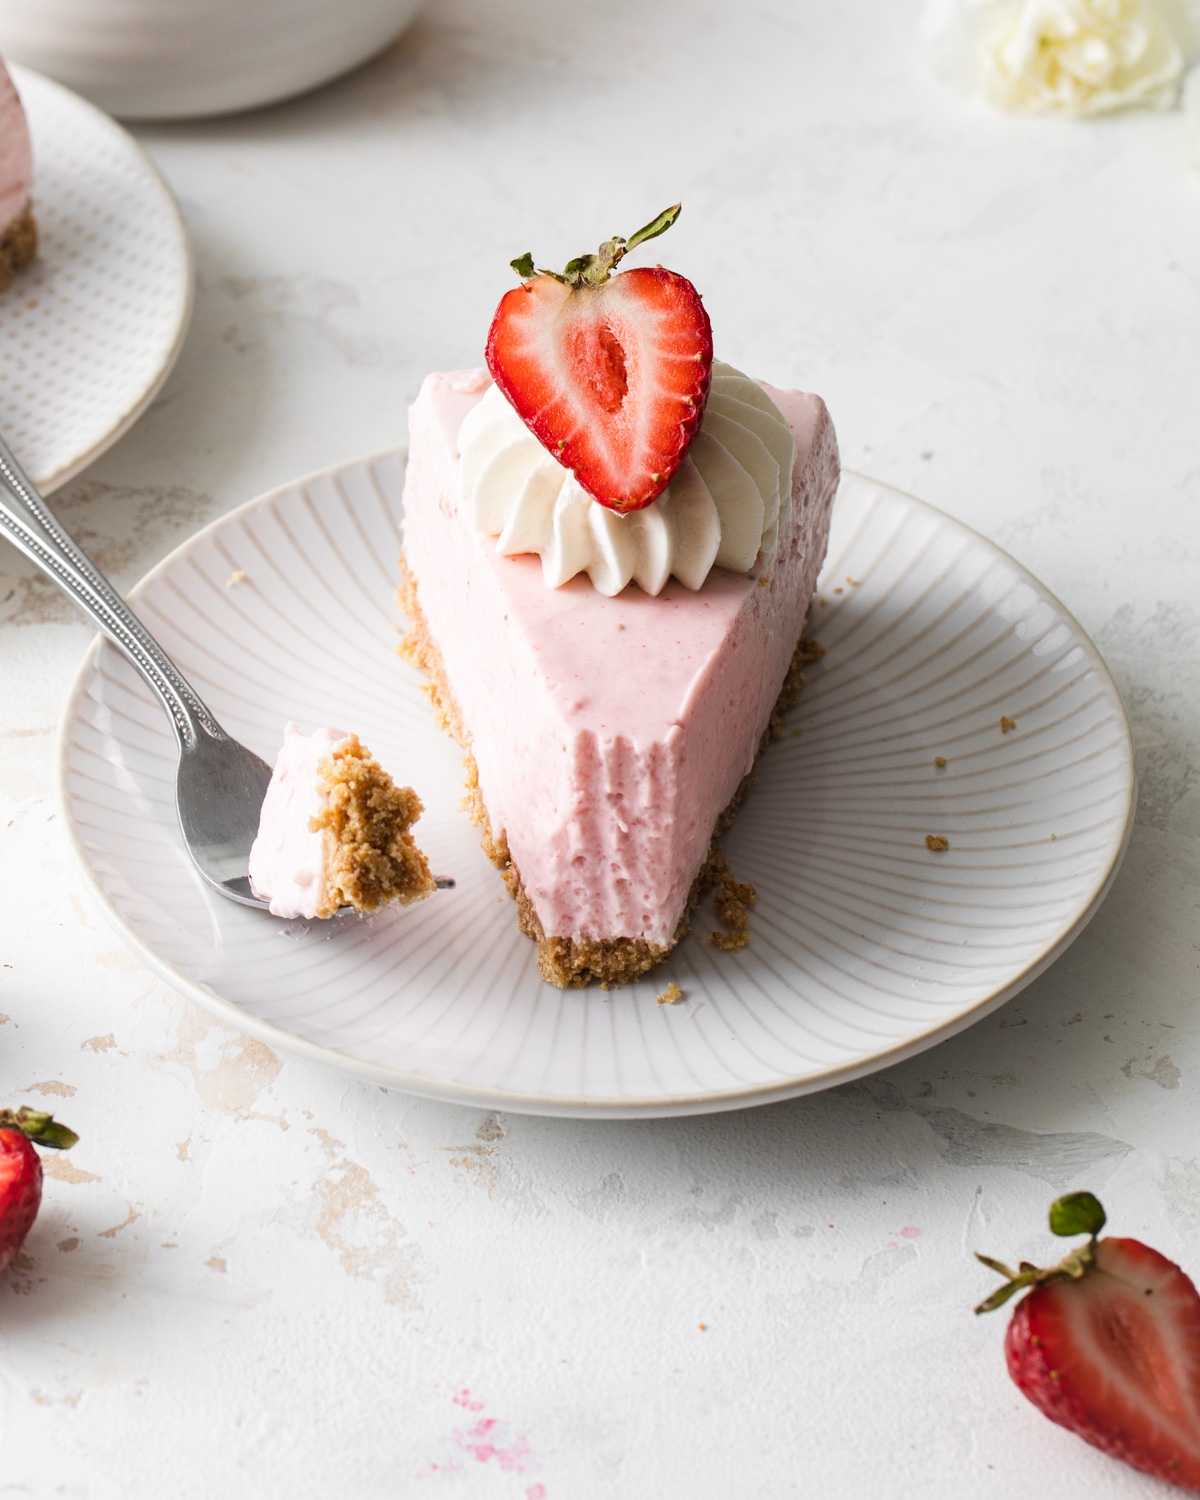 A slice of no-bake strawberry cheese with a fresh strawberry on top